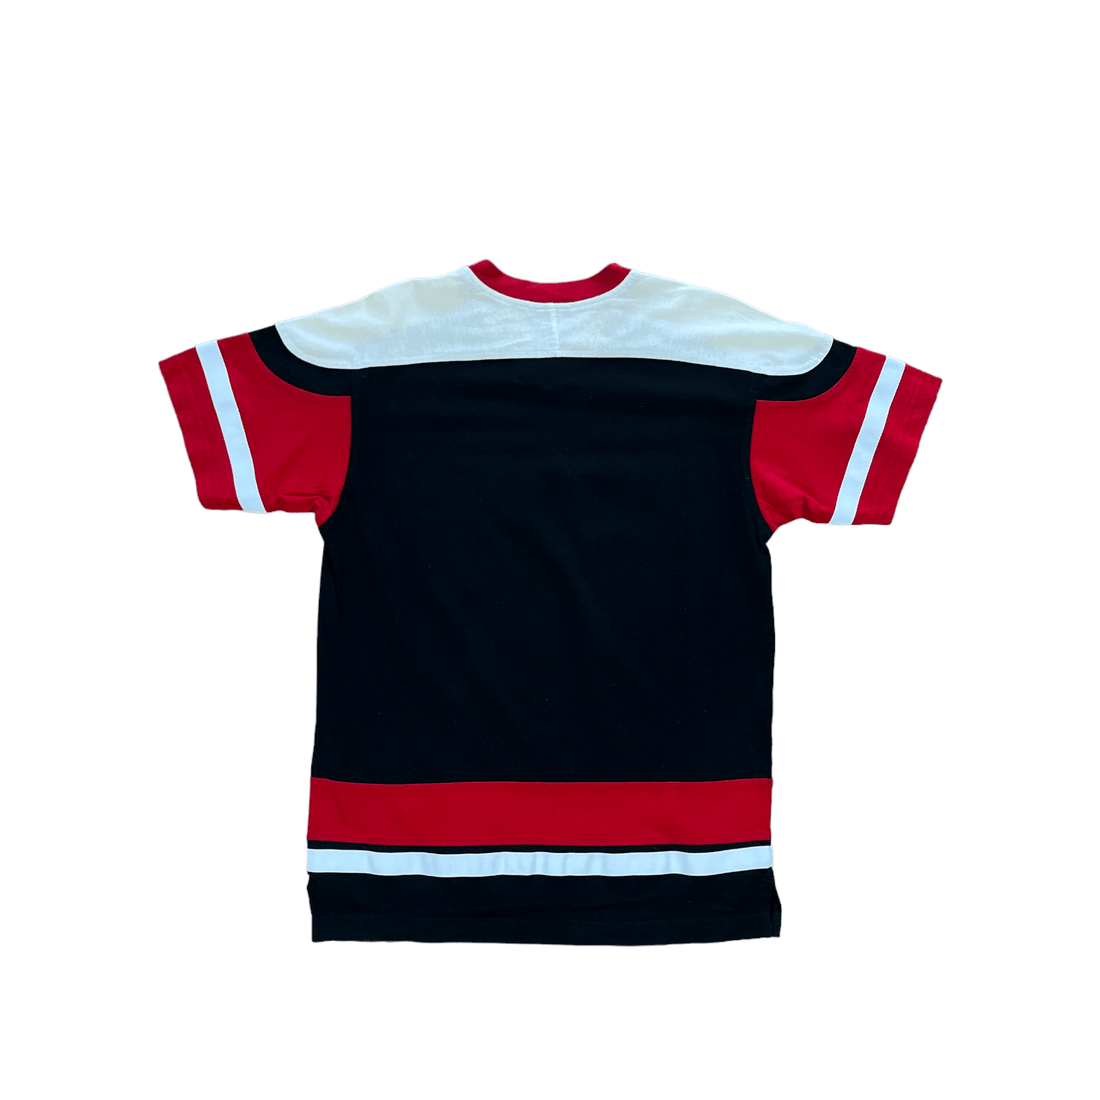 Vintage 90s Black, Red + White Champion Tee - Recommended Size - Small - The Streetwear Studio